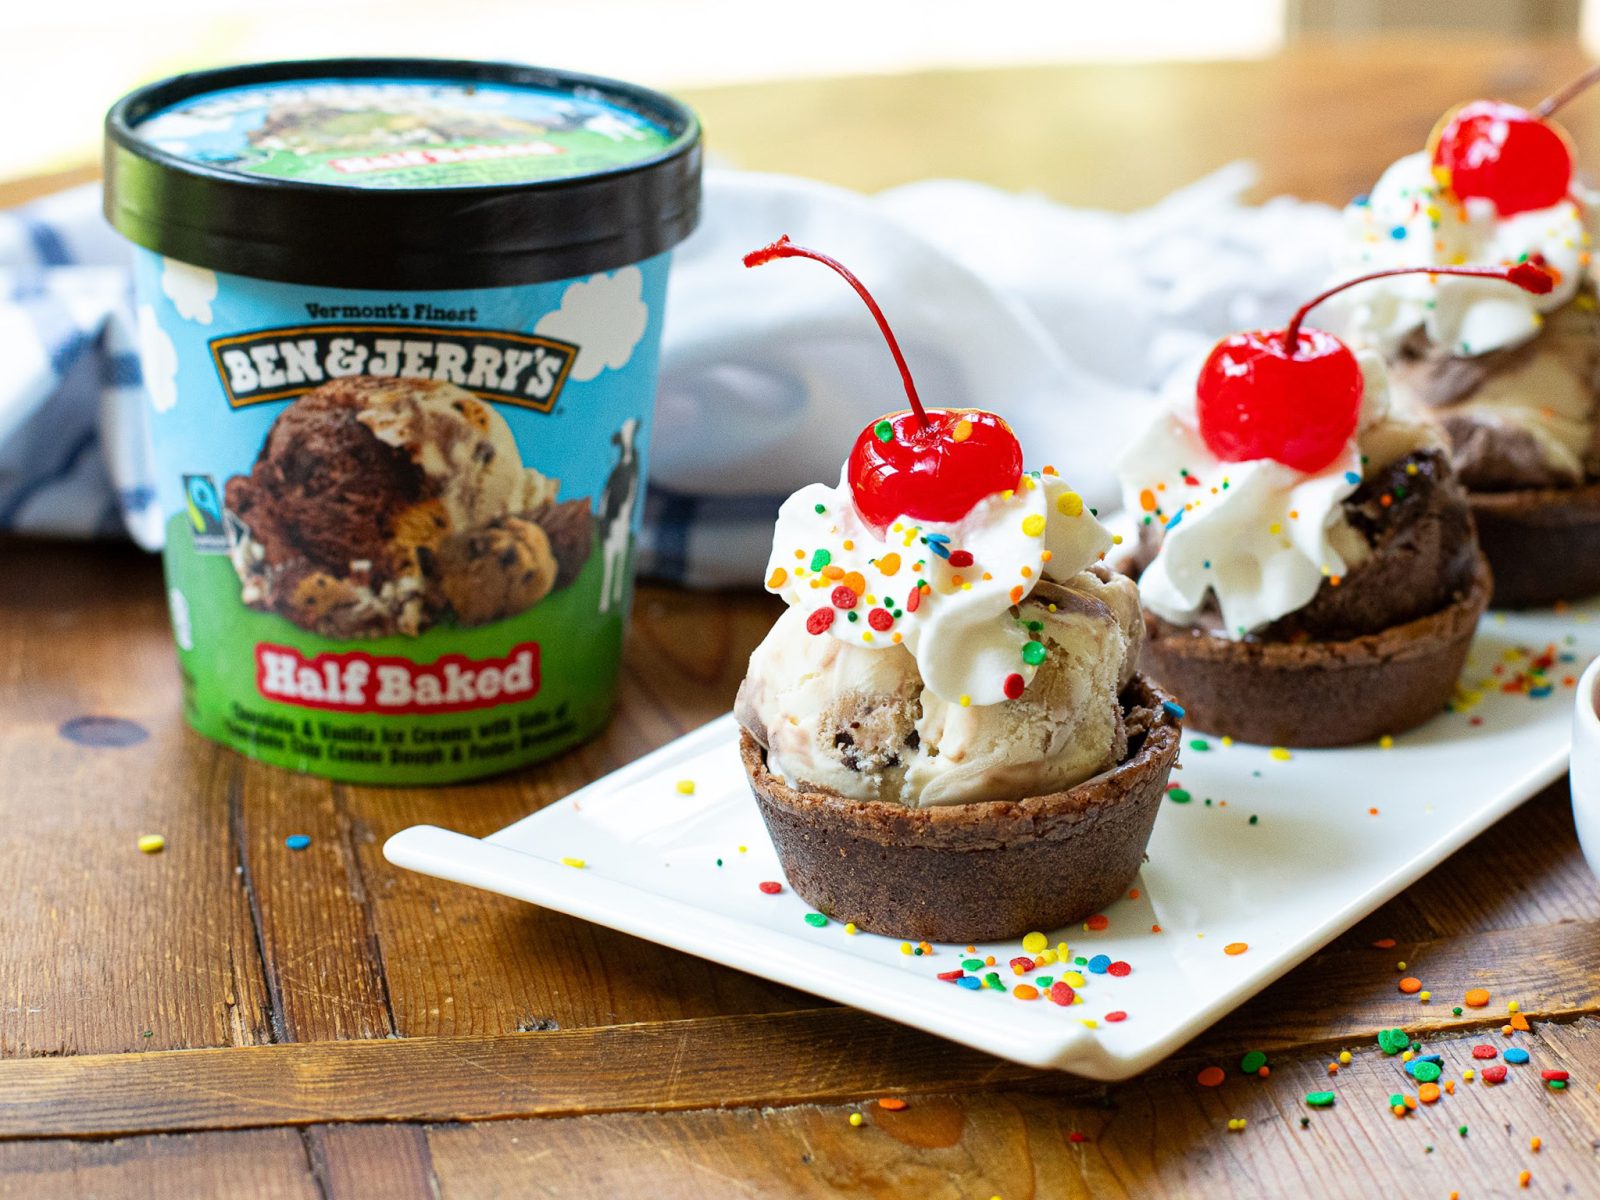 Ben & Jerry’s Ice Cream Is Just $3.49 At Kroger